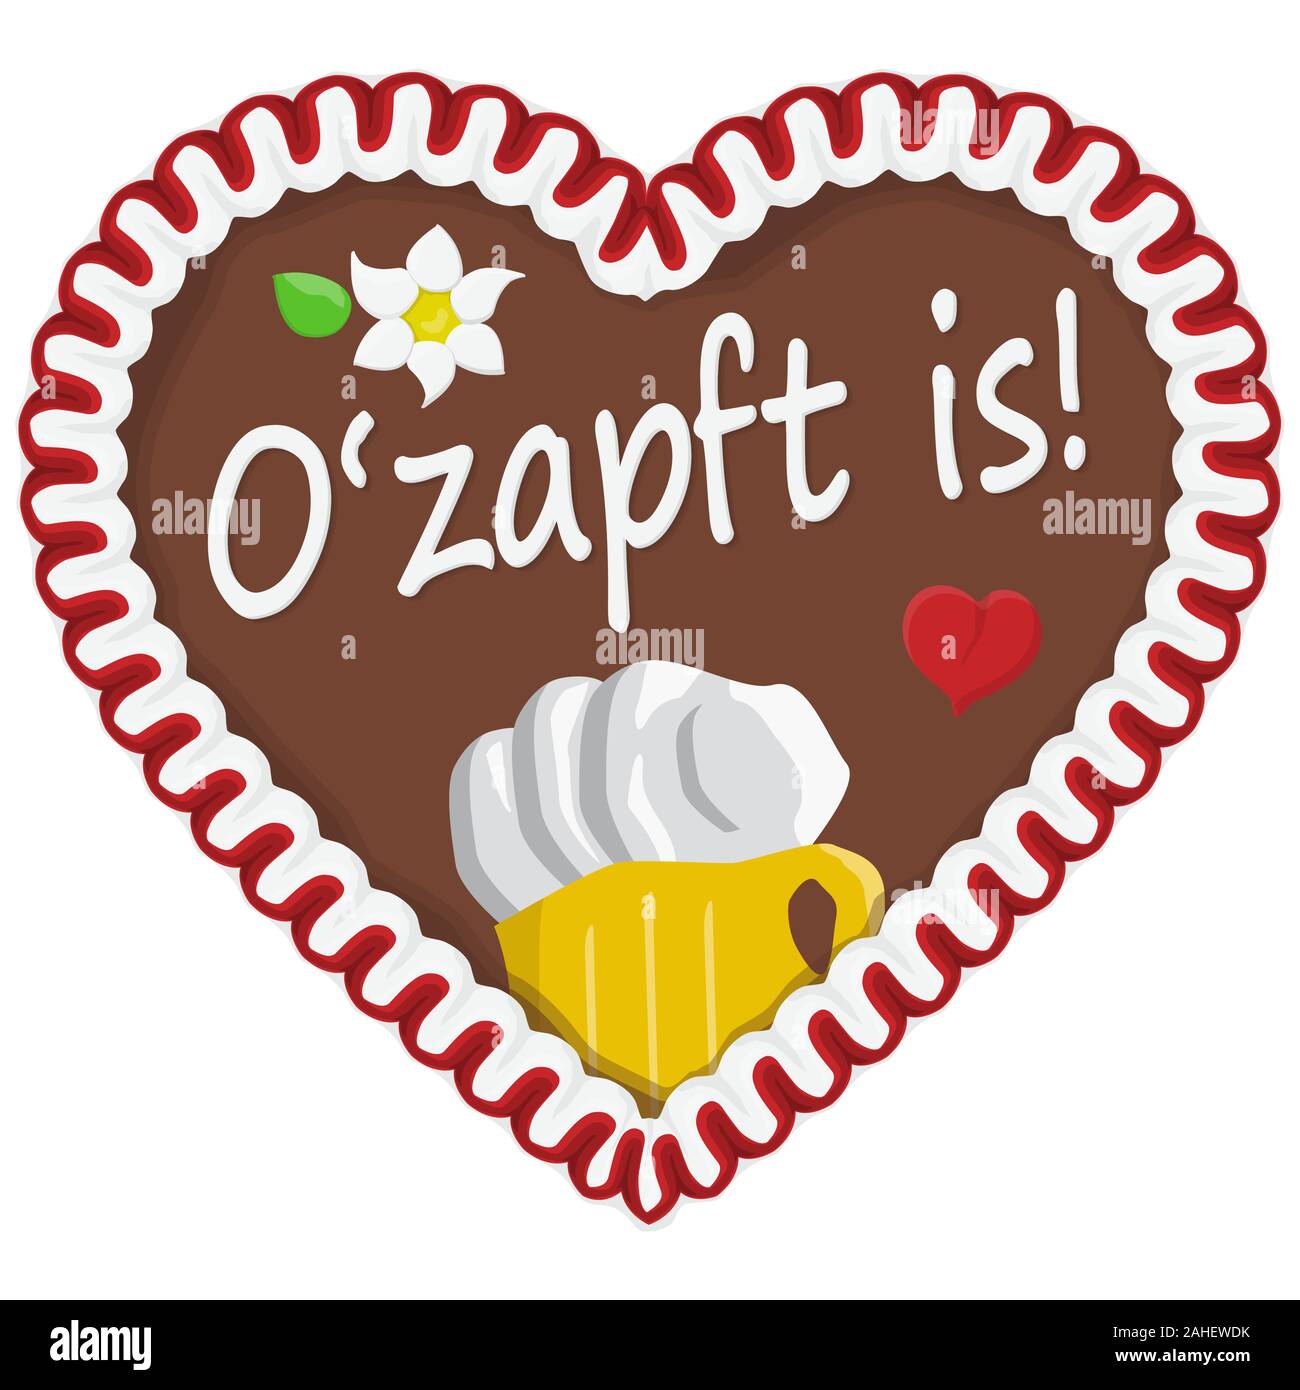 illustrated gingerbread heart with text in german for Oktoberfest time 2019 2020 Stock Vector